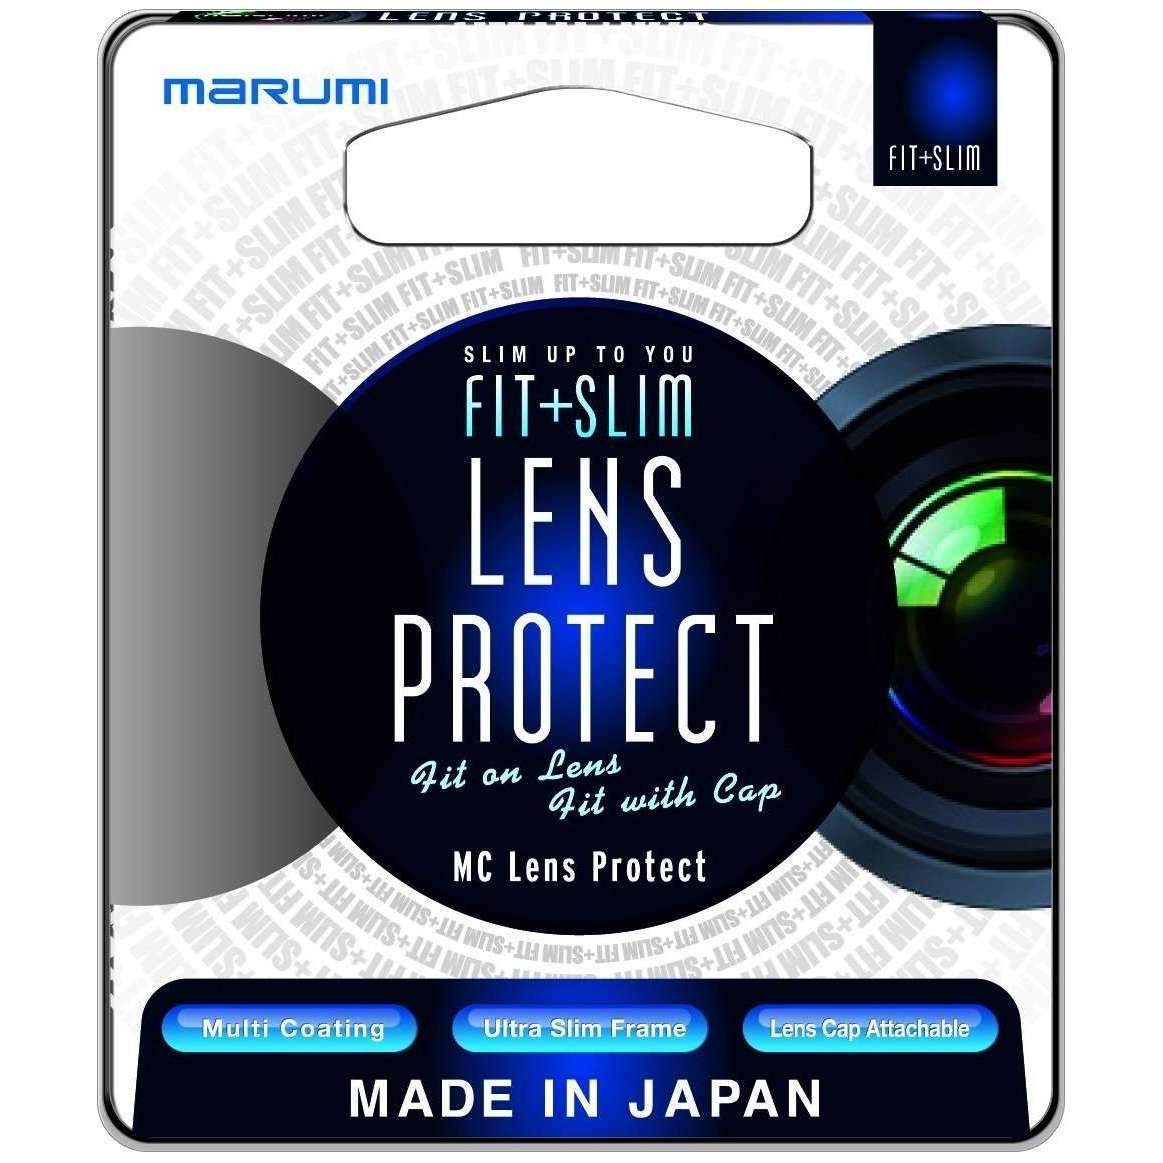 Marumi 55mm Fit + Slim Multi Coated Lens Protect Filter Marumi Filter - UV/Protection